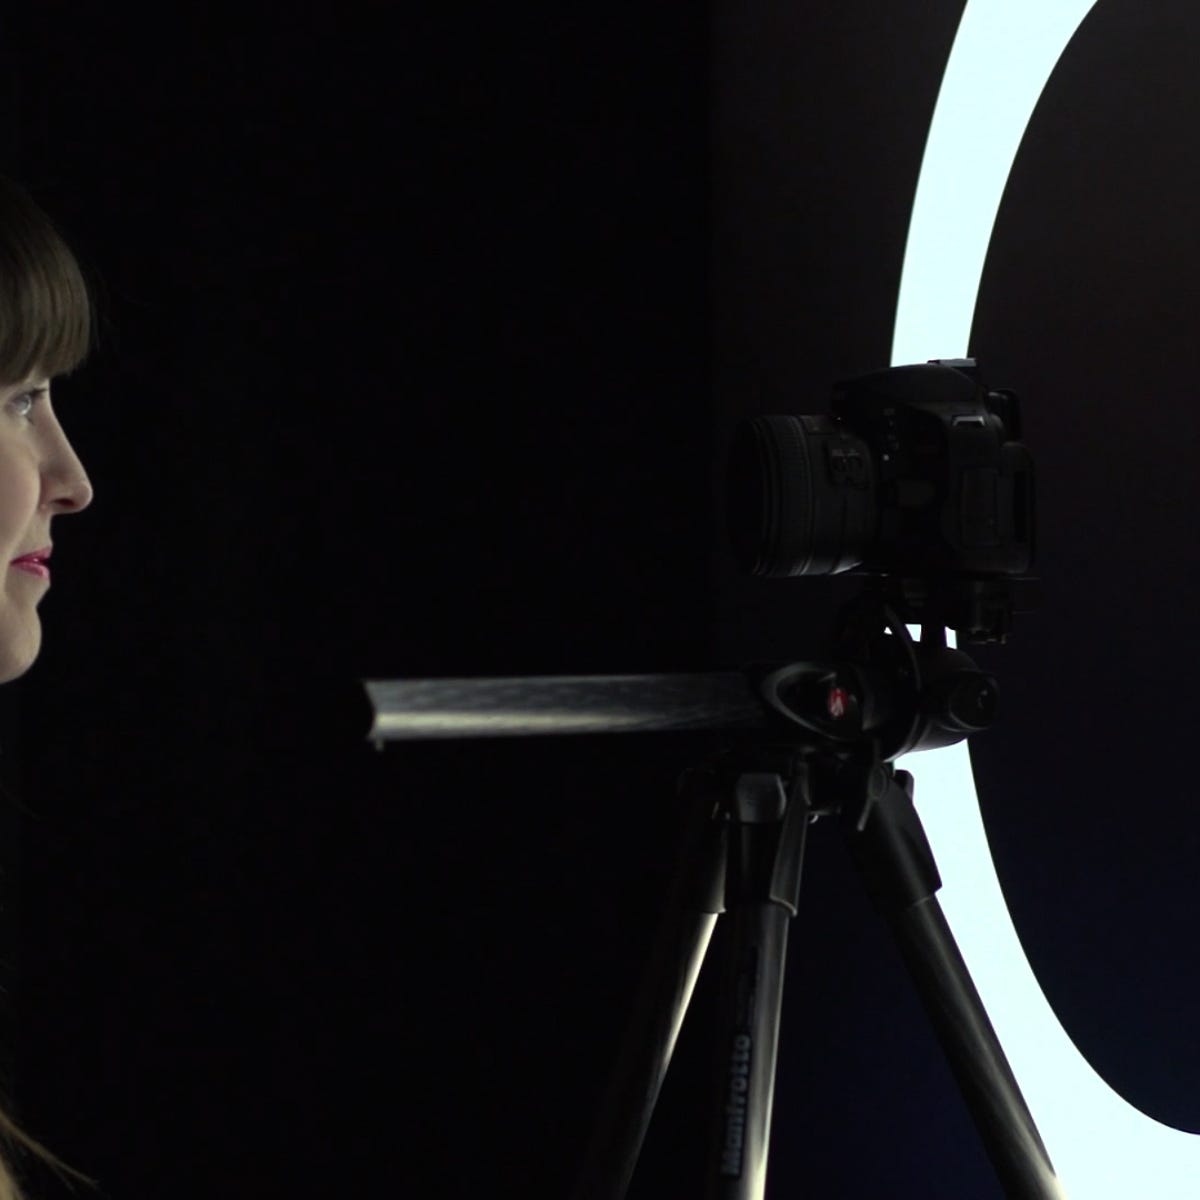 How to use your monitor or tv as a ring light